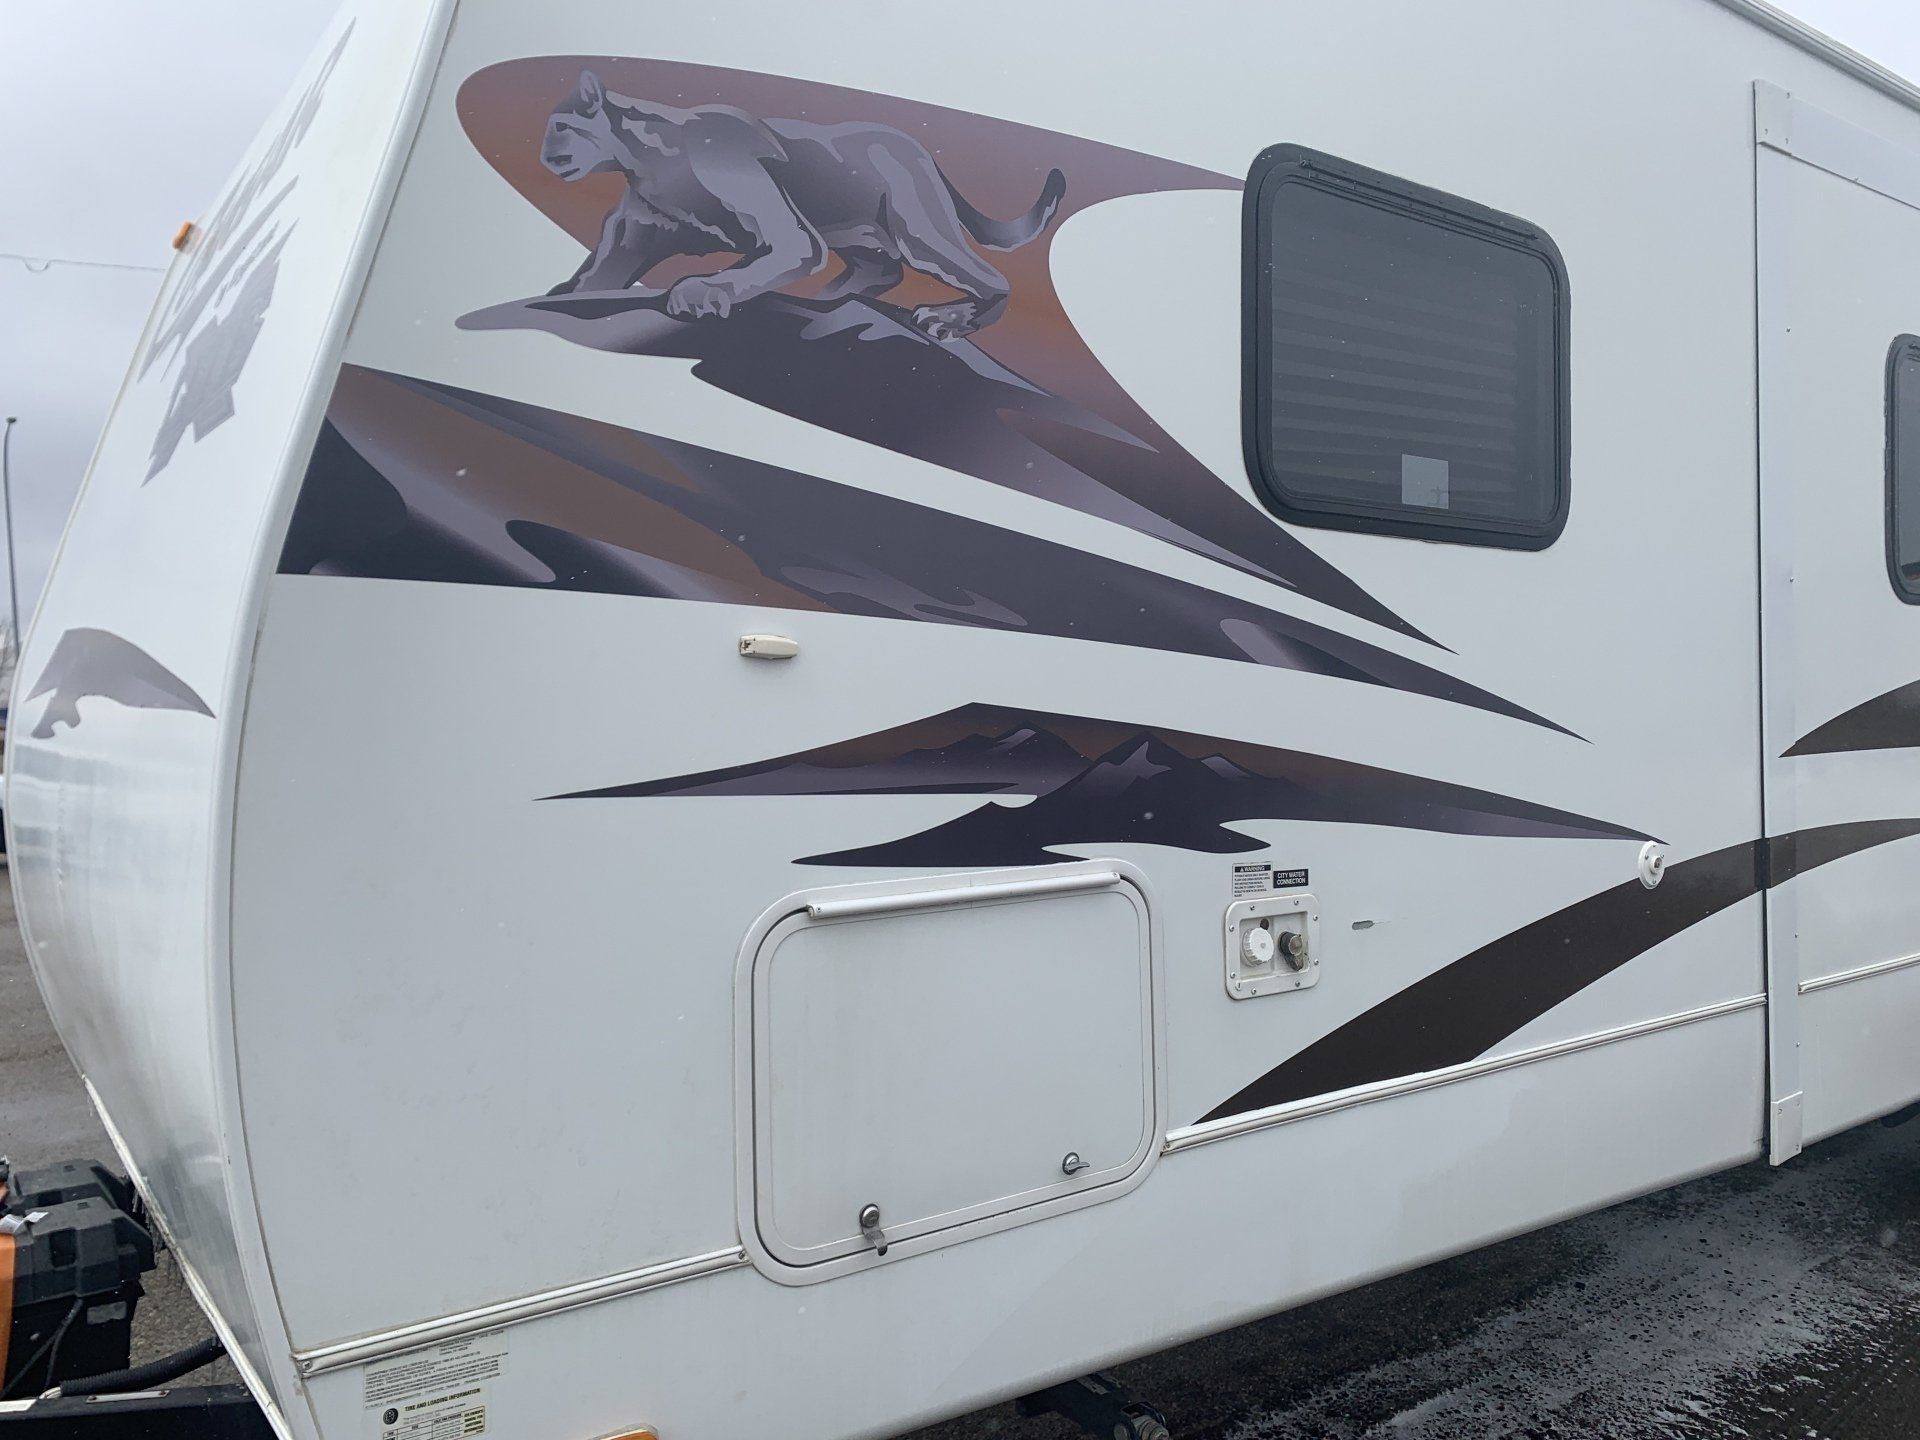 2020 - Alberta's Worst RV Decal Contest - Grand Prize Winner - Before & After - Pic 6